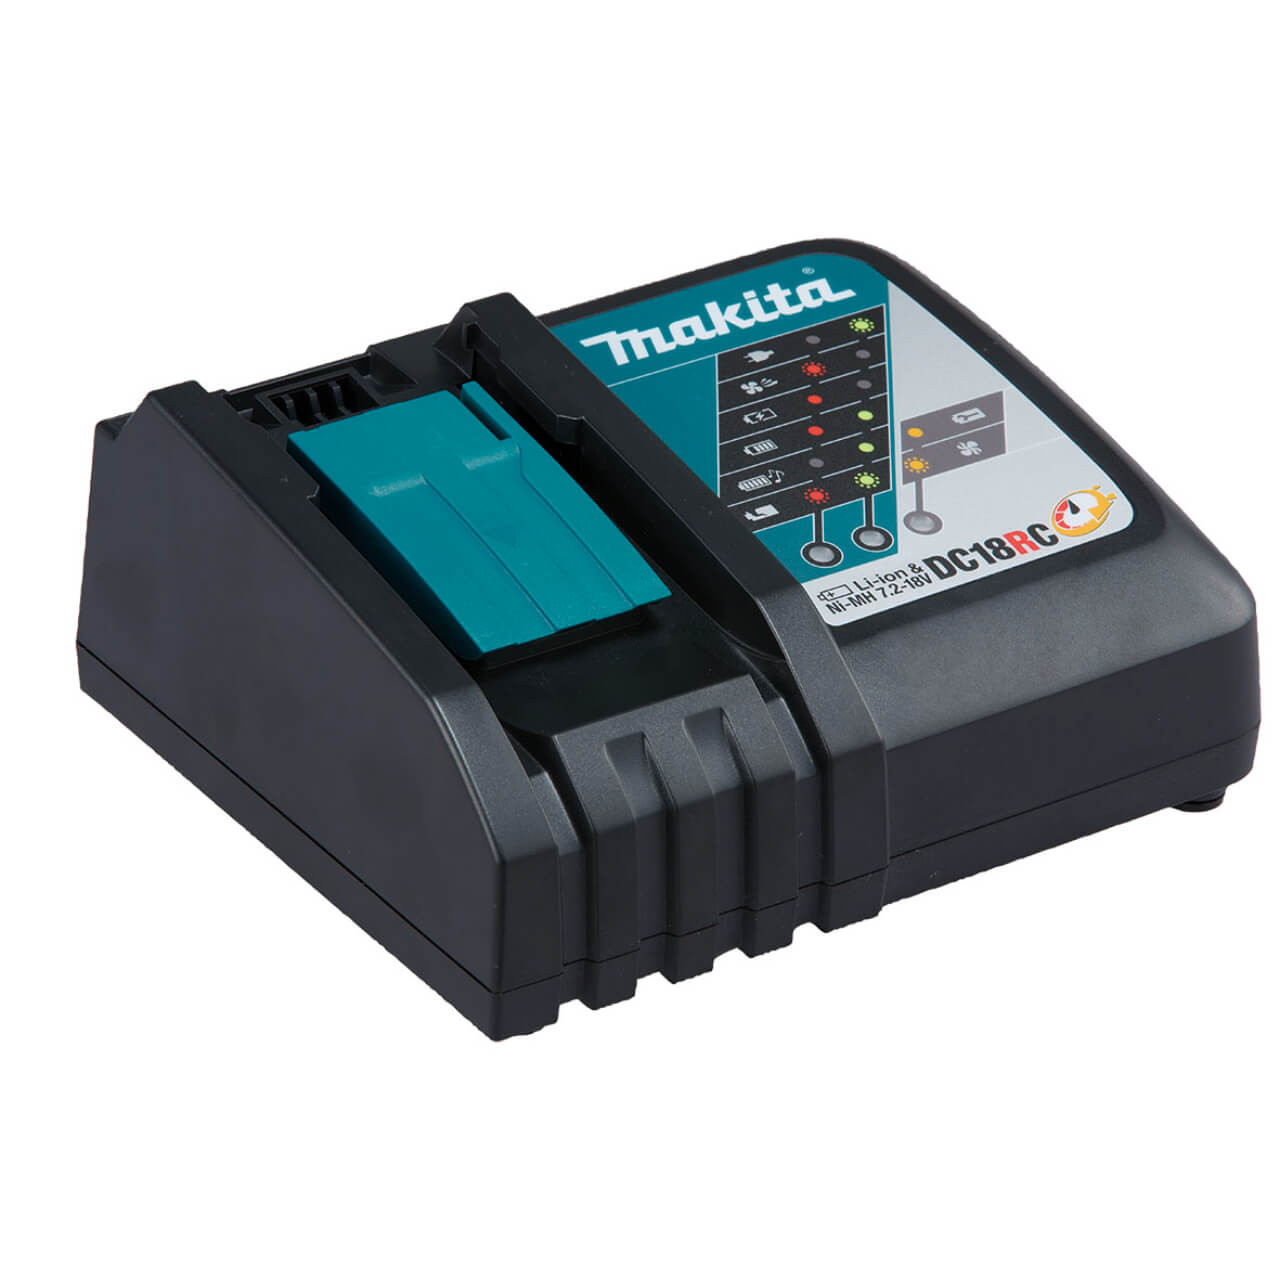 Makita 18V Autofeed Screwdriver Kit - Includes 2 x 3.0Ah Batteries. Rapid Charger & Carry Case